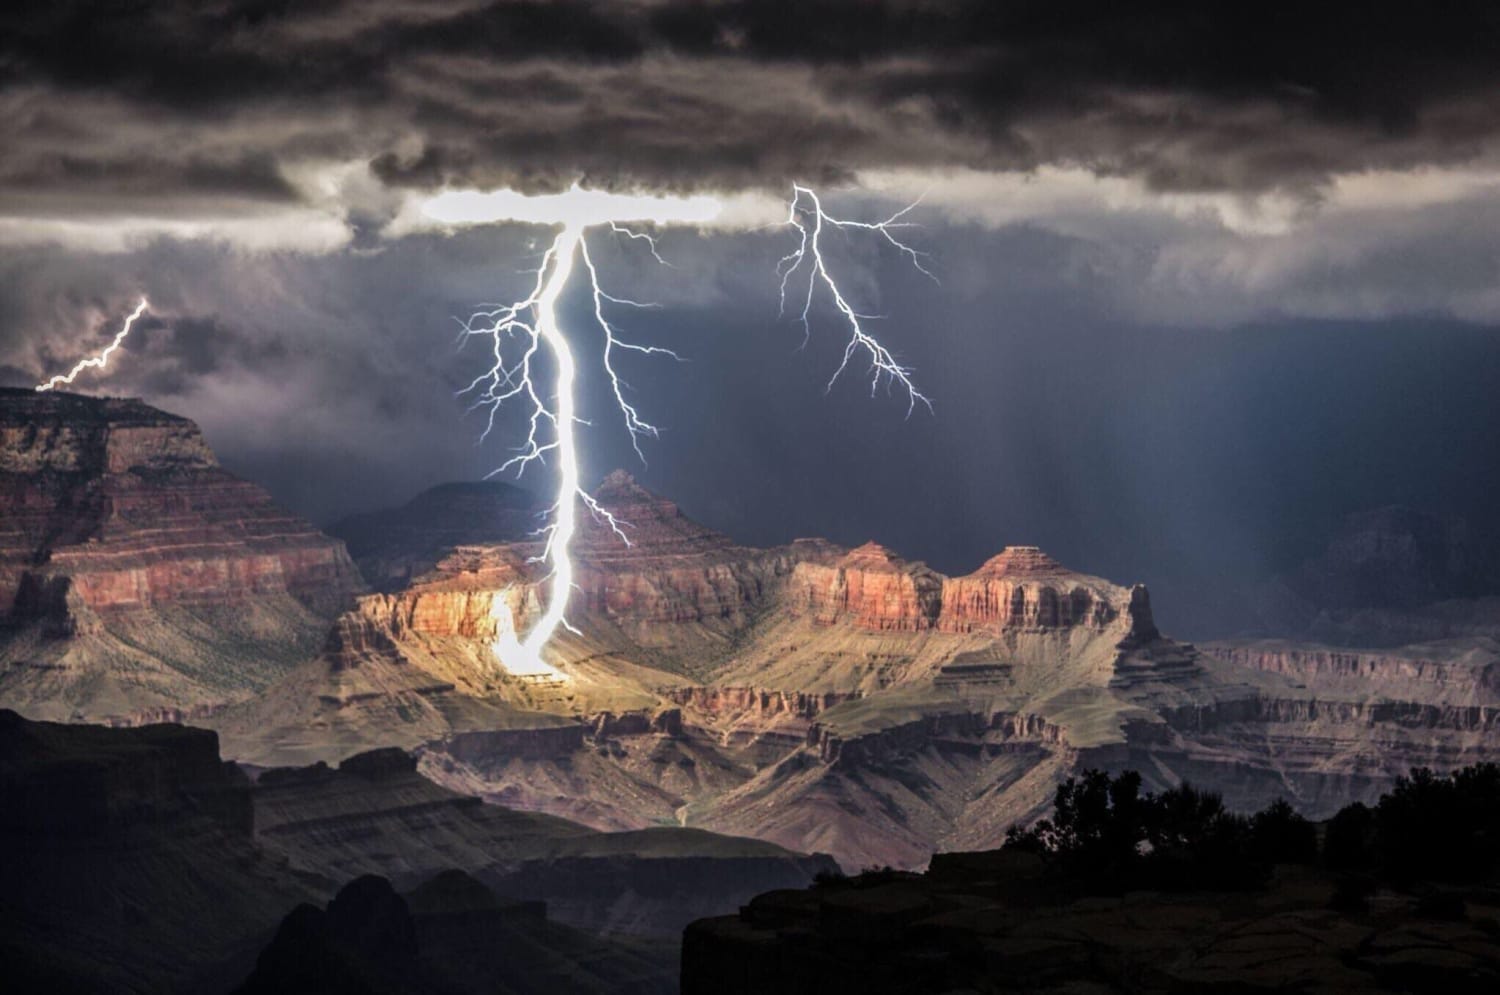 This is what the Grand Canyon look like when it's lit only by lightning